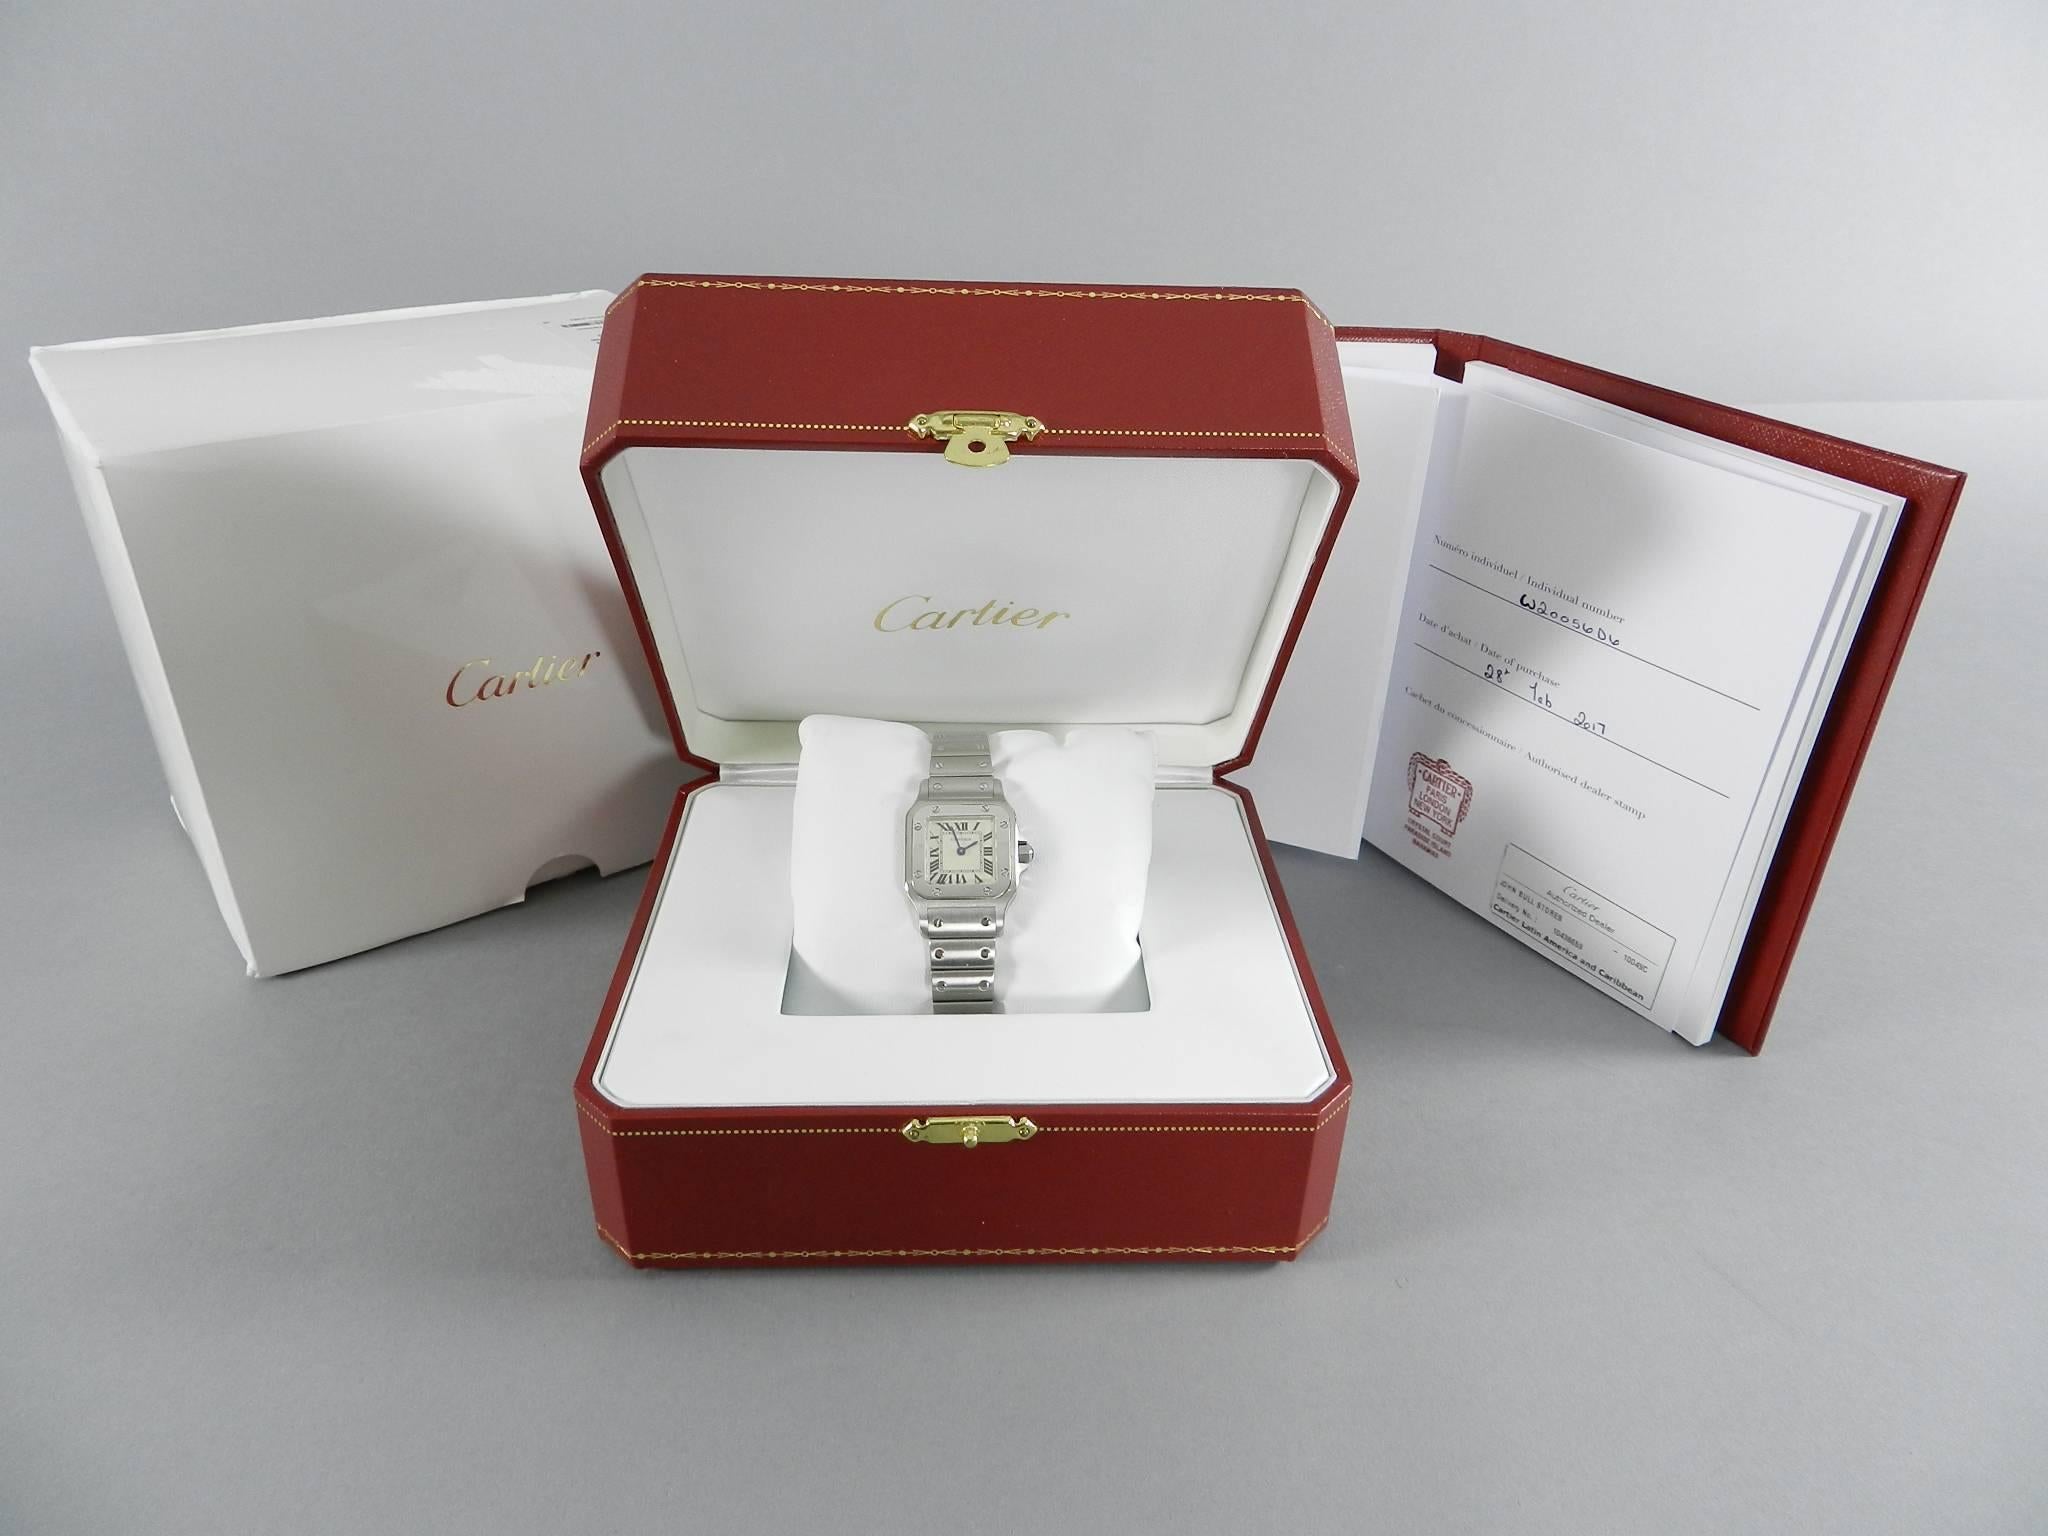 Cartier ladies santos galbee stainless steel watch. Reference number W20056D6.  Size small 25mm. Excellent pre-owned condition (worn only a few times) with box, packaging, and authenticity certificate dated February 28, 2017. Retail price currently